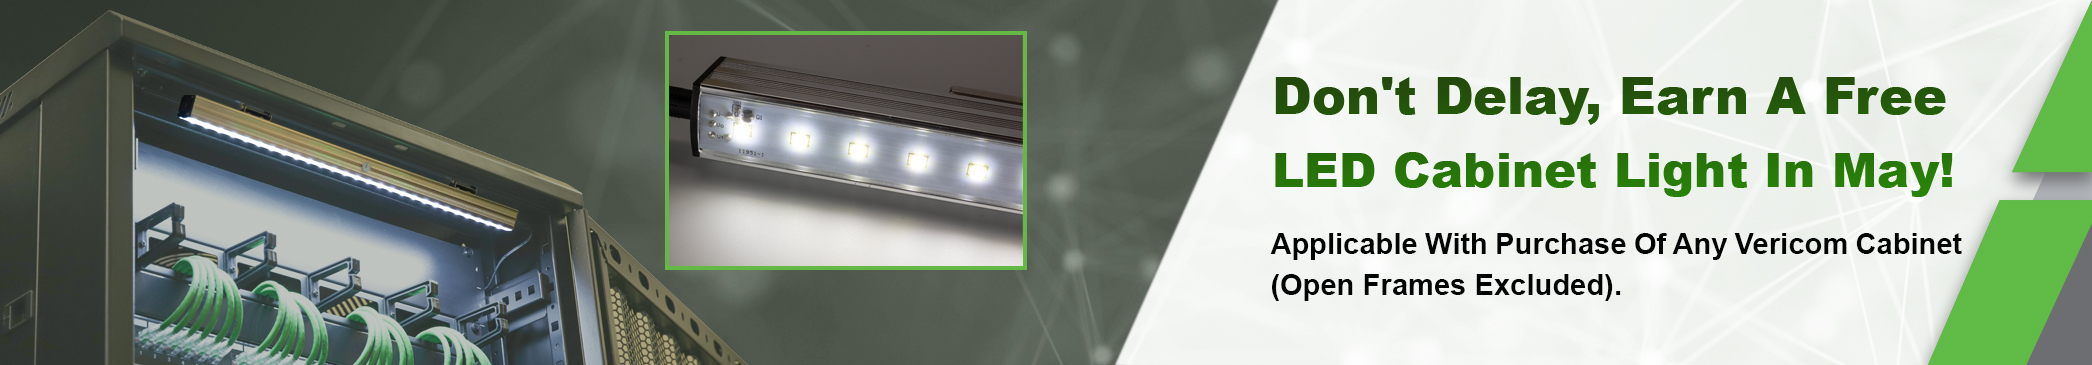 MAY 2022 PROMO: DON'T DELAY, EARN A FREE LED CABINET LIGHT IN MAY